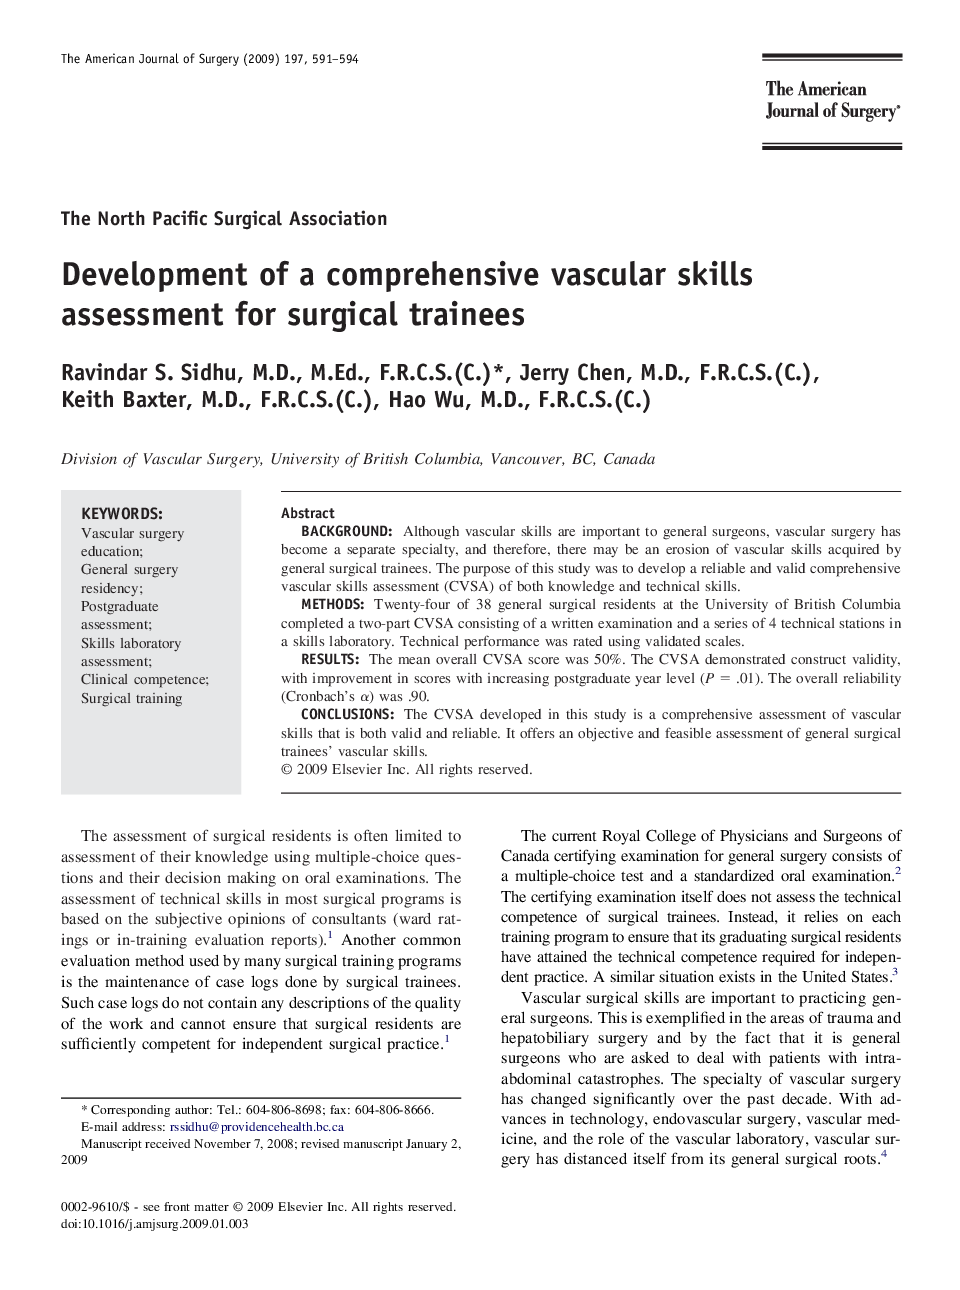 Development of a comprehensive vascular skills assessment for surgical trainees